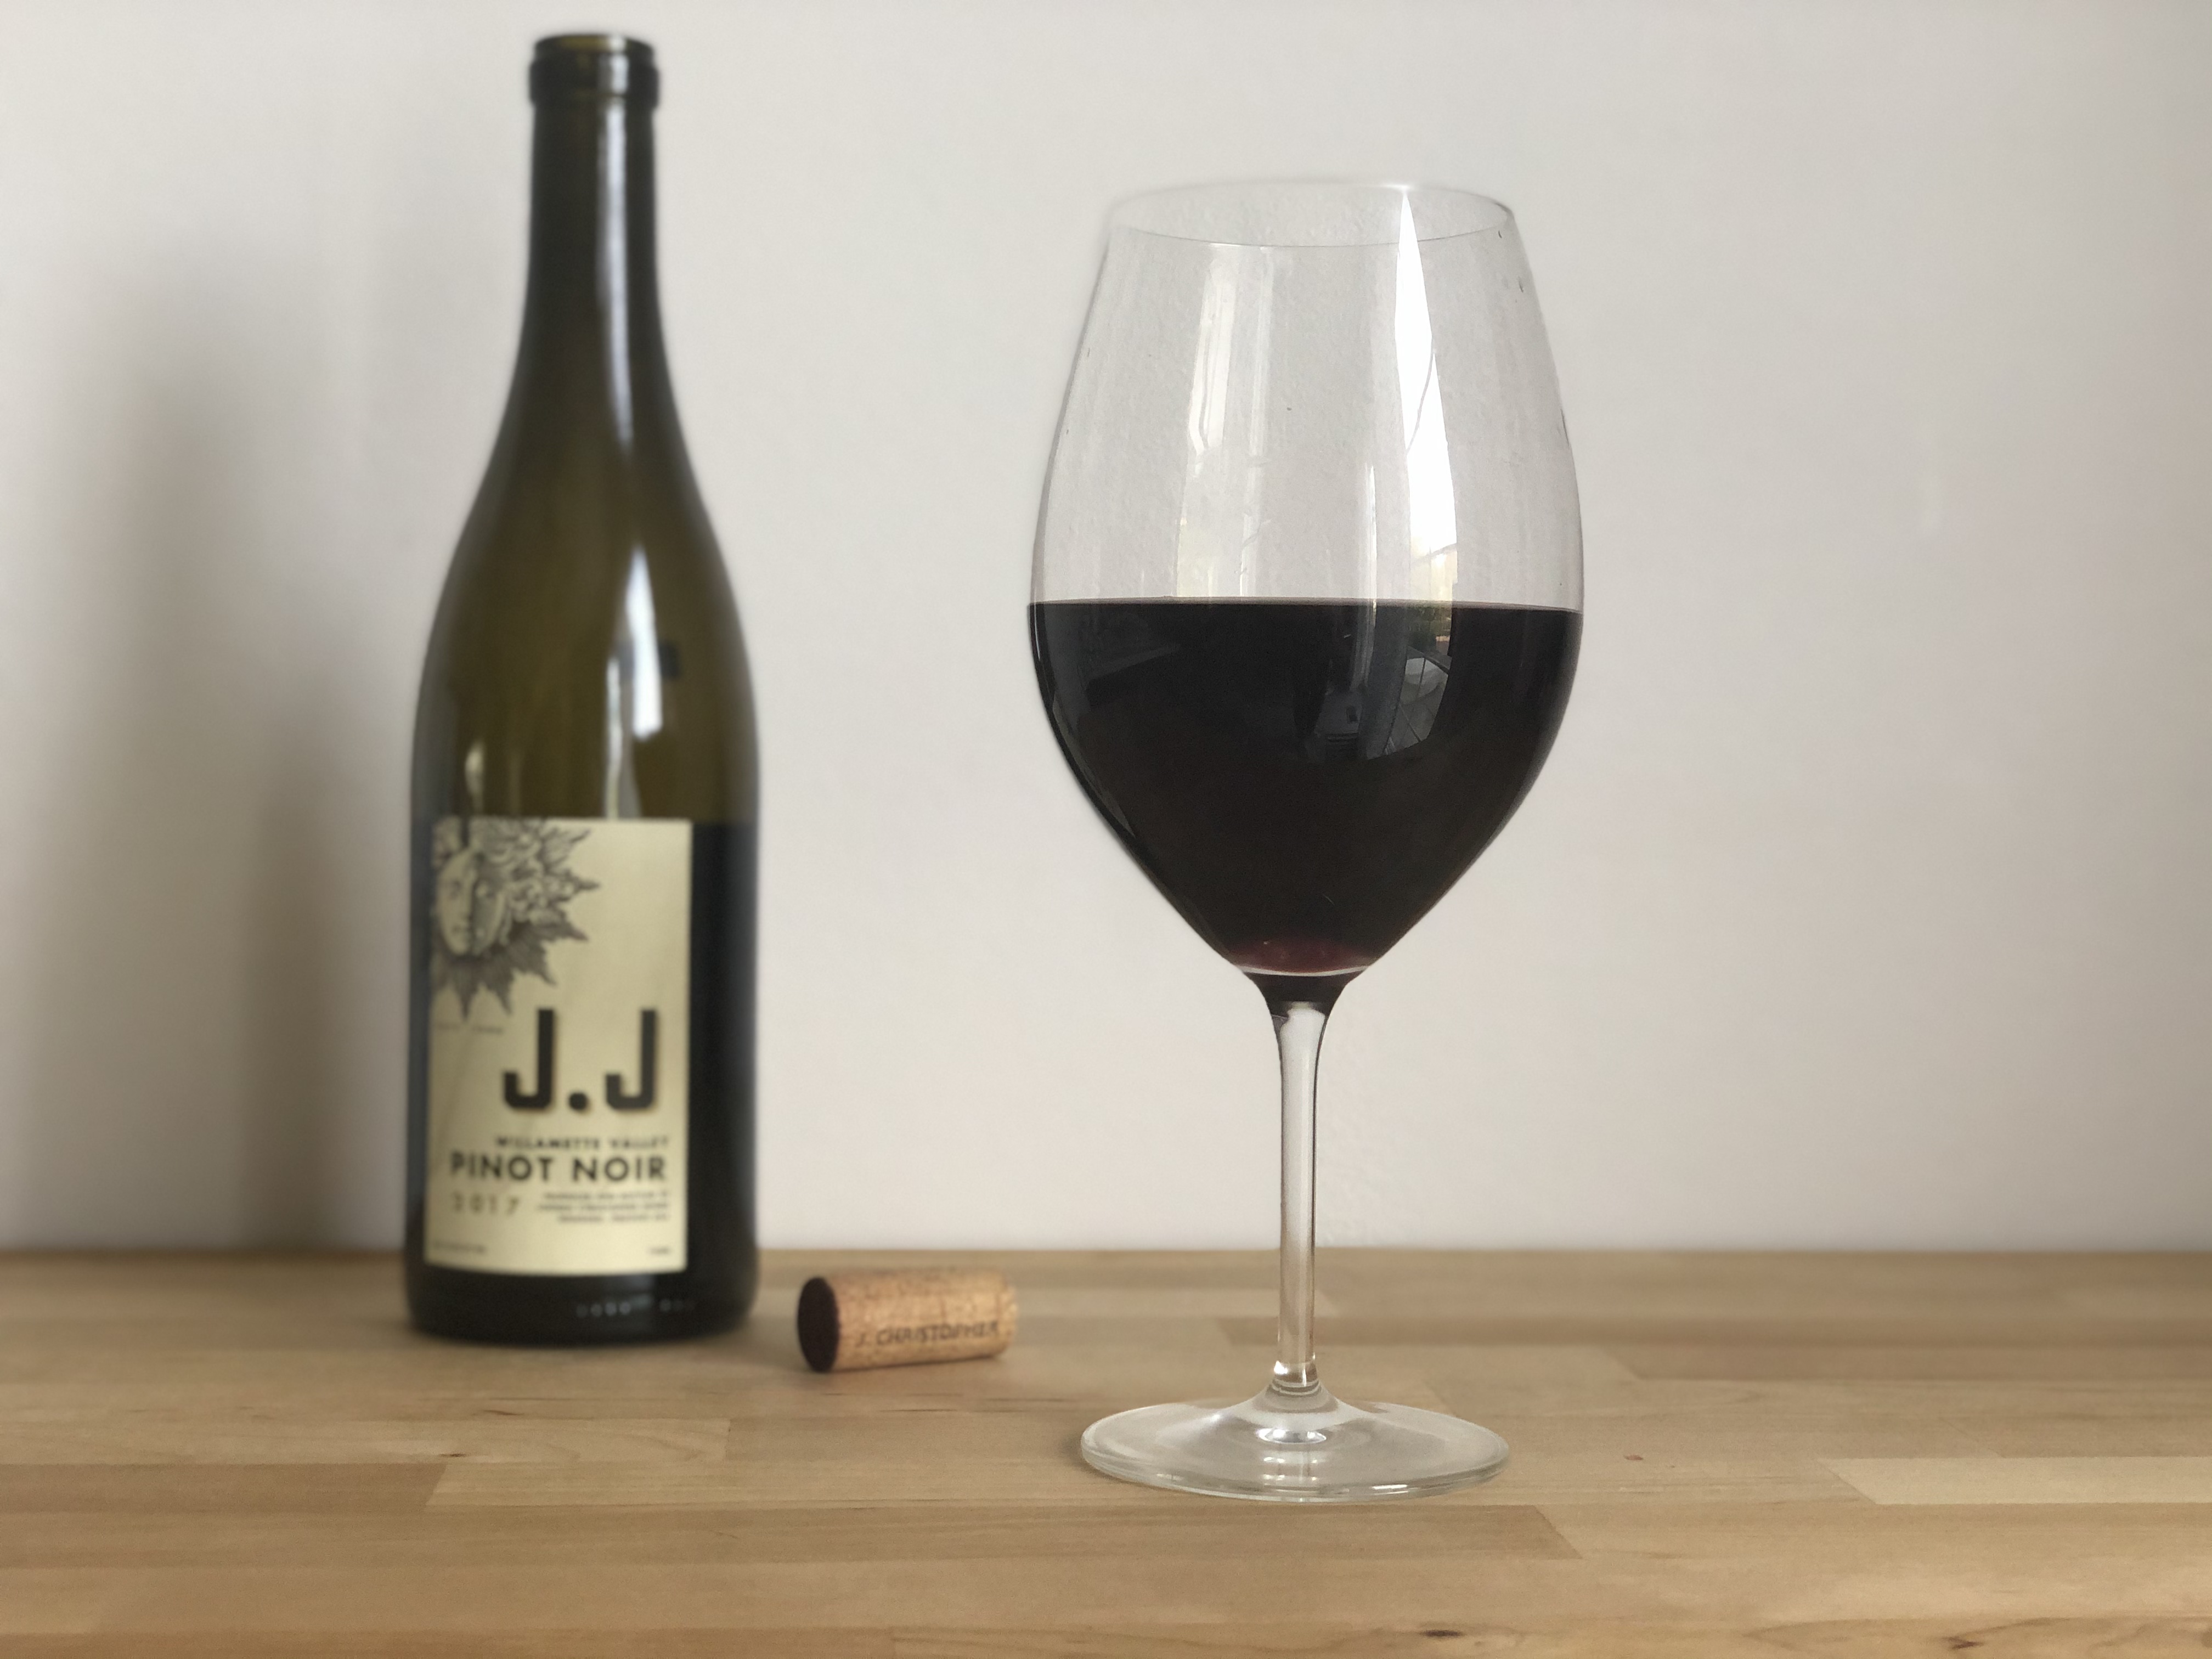 A glass of red is poured on a wooden counter with the bottle J.J. pinot noir with the cork. Photo by Alyssa Buckley.